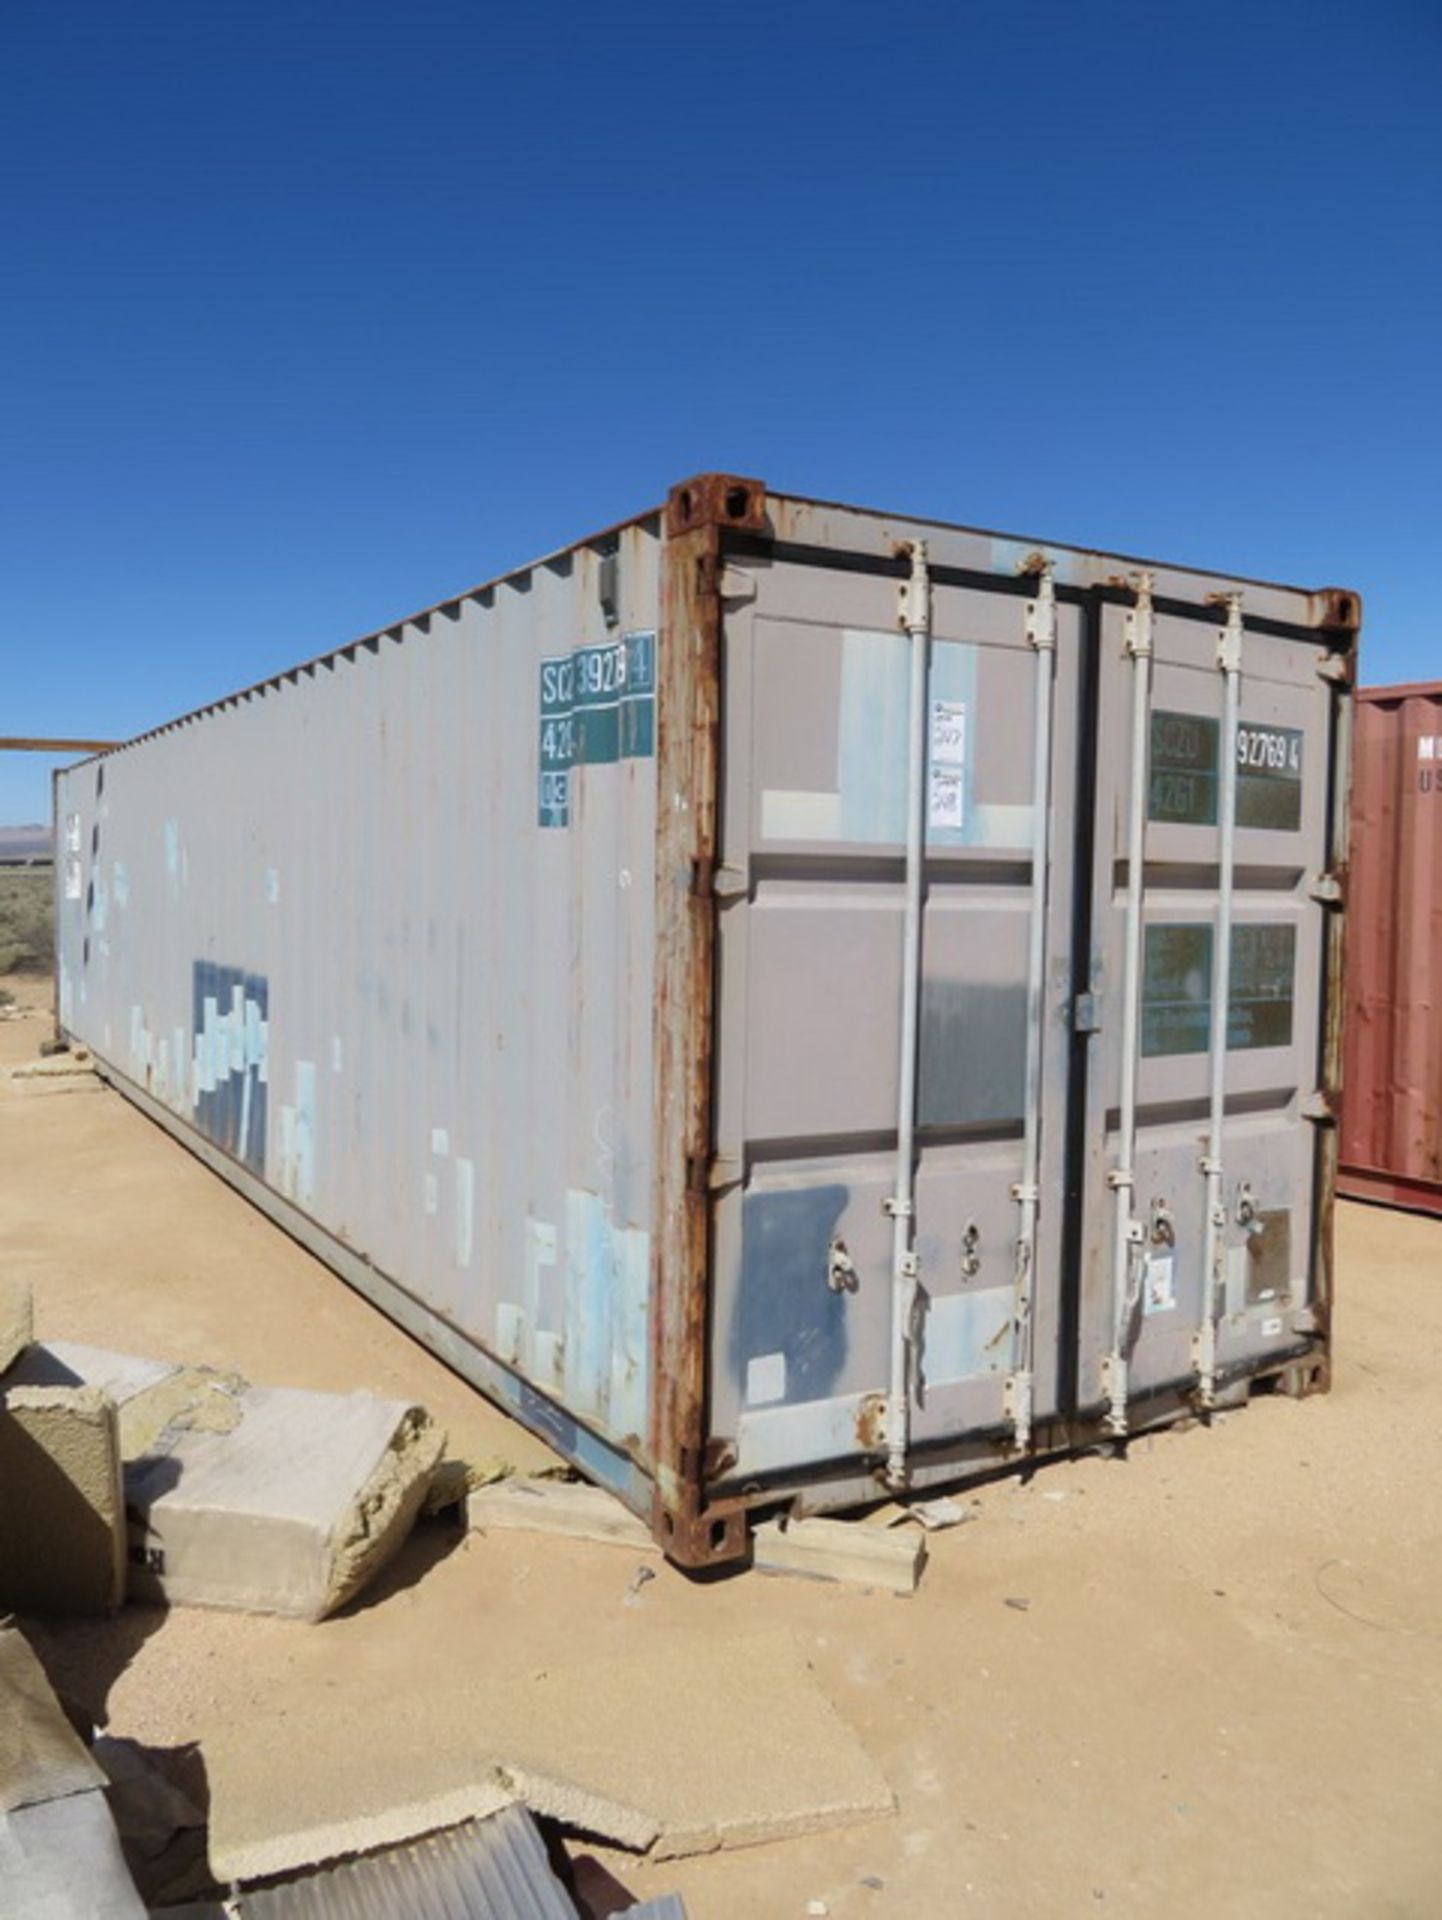 Xinhui CIMC Container Co. 1AA-147GC40 Shipping Container, 40' x 8' x 102"H, 2,389 Cu.Ft, 7,940 LBS